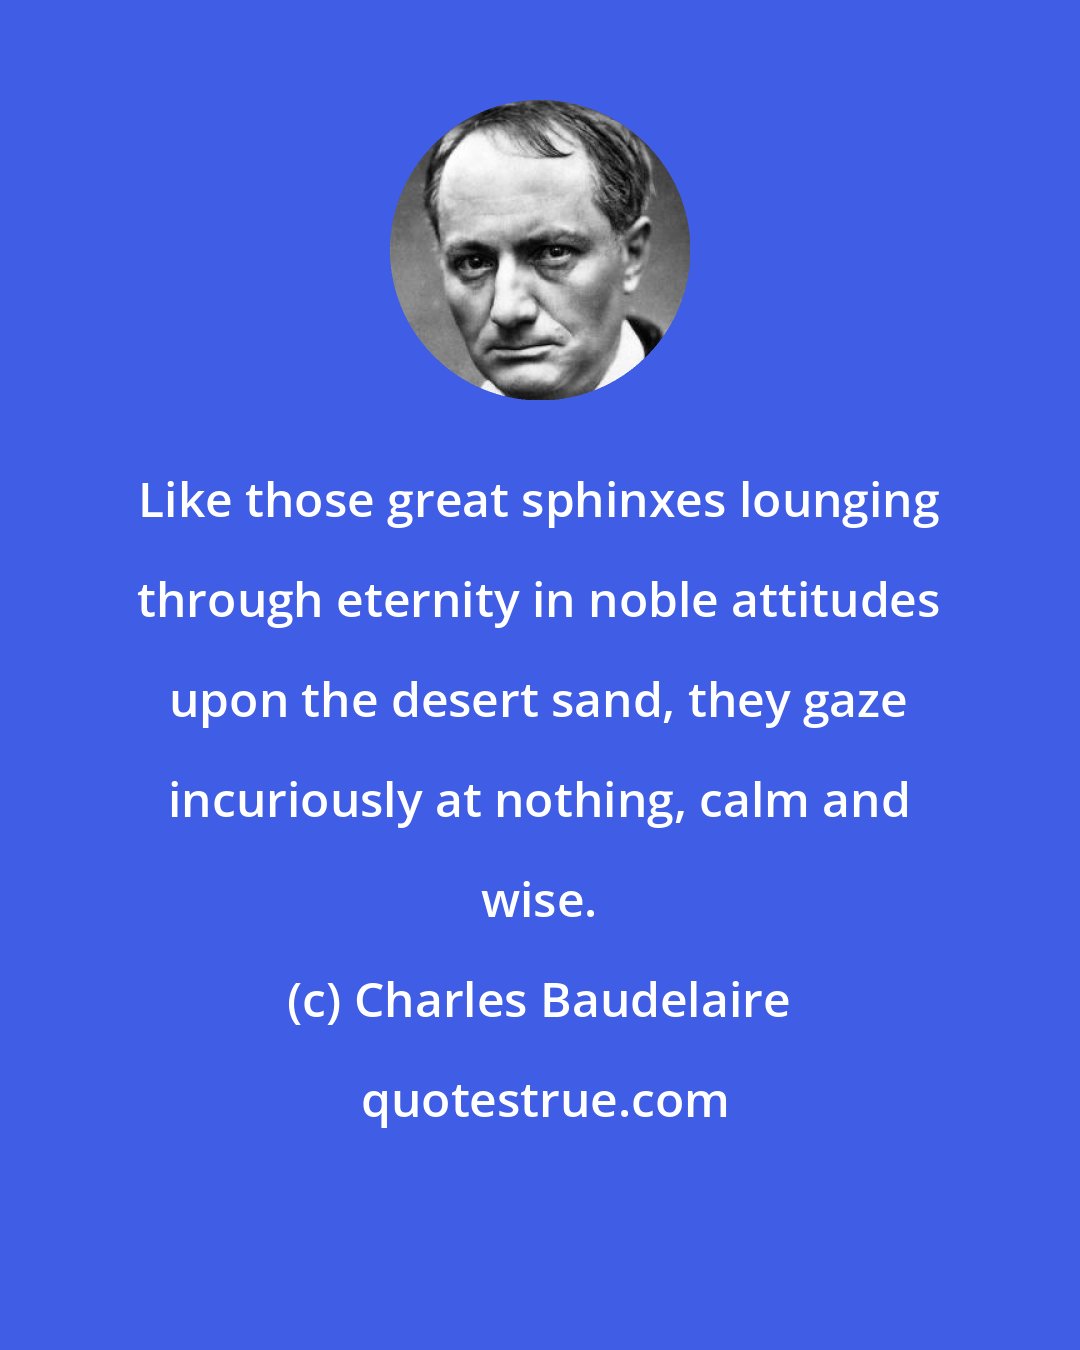 Charles Baudelaire: Like those great sphinxes lounging through eternity in noble attitudes upon the desert sand, they gaze incuriously at nothing, calm and wise.